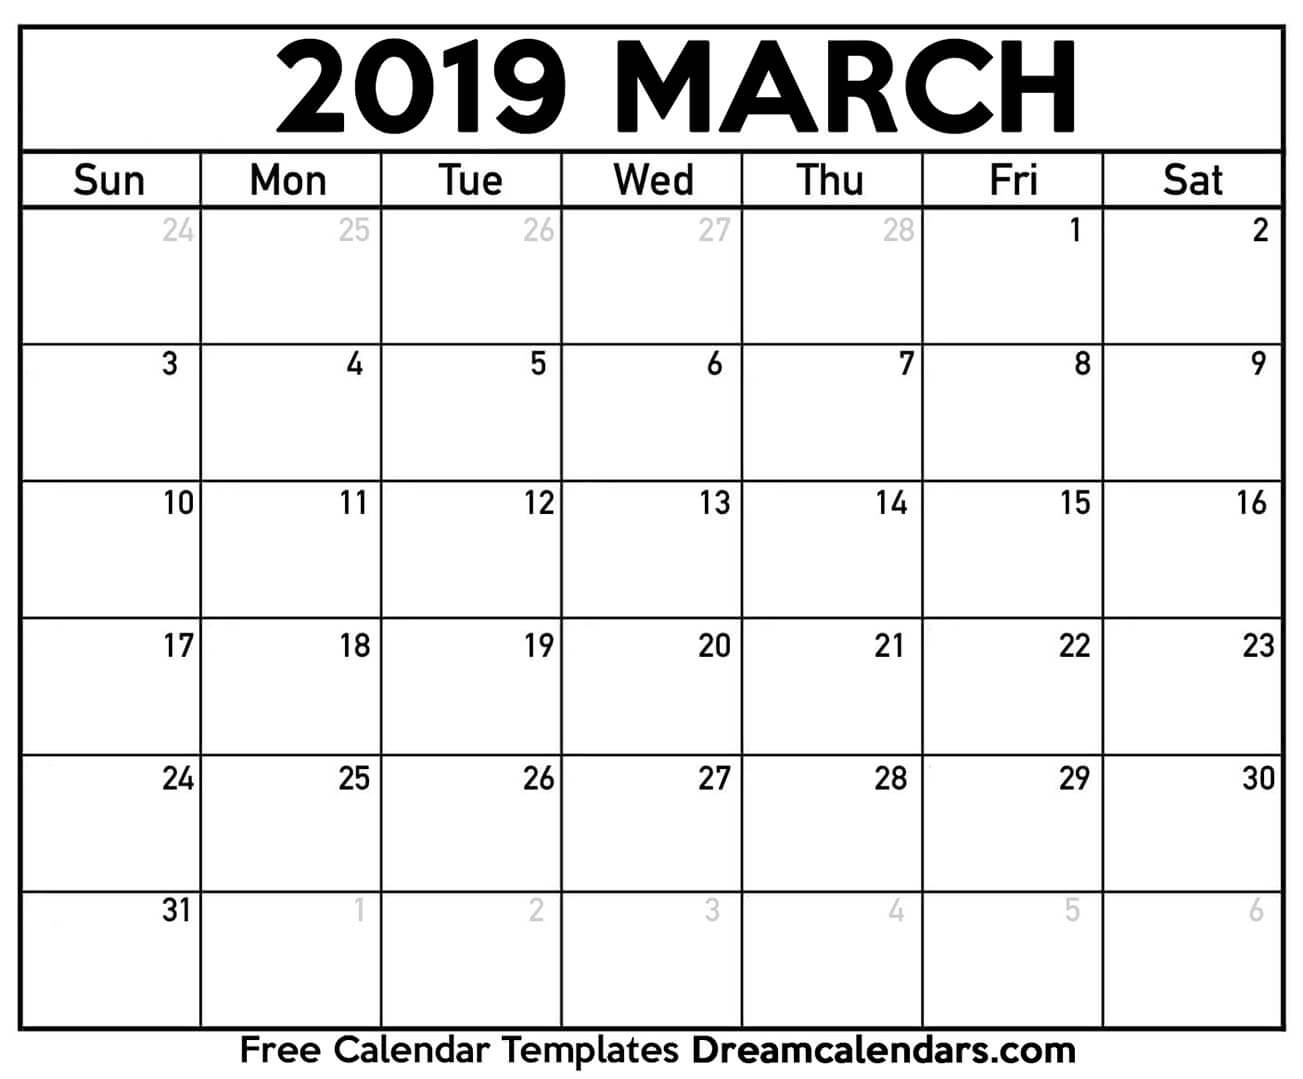 March 2019 calendar Free blank printable with holidays